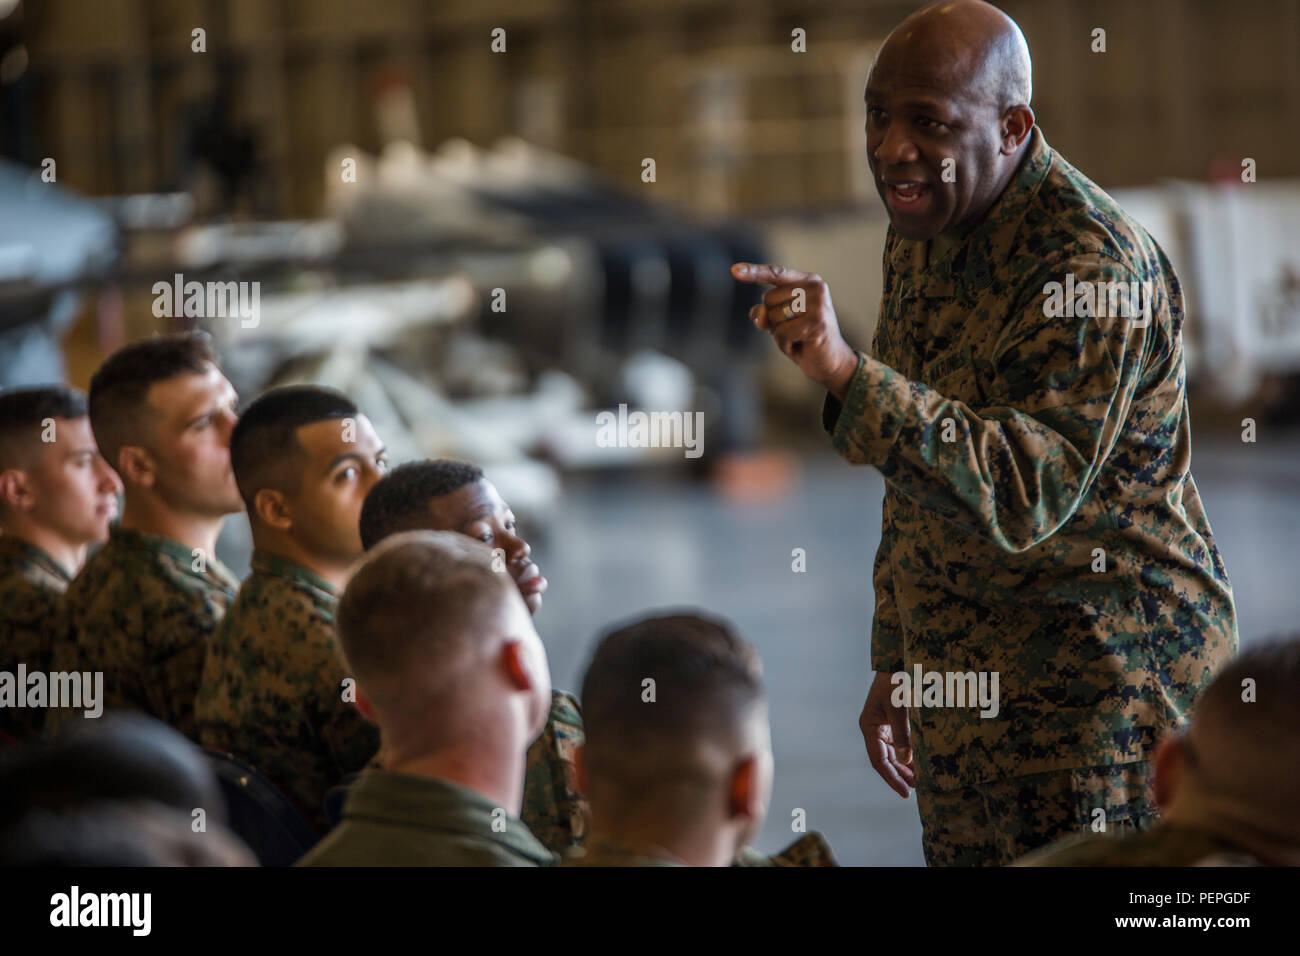 Sergeant Major of the Marine Corps, Sgt. Maj. Ronald L. Green, addresses Marines with Marine Aircraft Group 49, 4th Marine Aircraft Wing, at Naval Air Station Joint Reserve Base New Orleans, Jan. 19, 2016. Sgt. Maj. Green spoke of his time in the Marine Corps, explained how he arrived to the position he holds today, and urged the Marines to stand up and share their experiences as well. Sgt. Maj. Green commended Marines for their hard work and encouraged them to protect what they’ve earned as a Marine. He also emphasized the importance of upholding the standards of the Corps on and off duty. Stock Photo